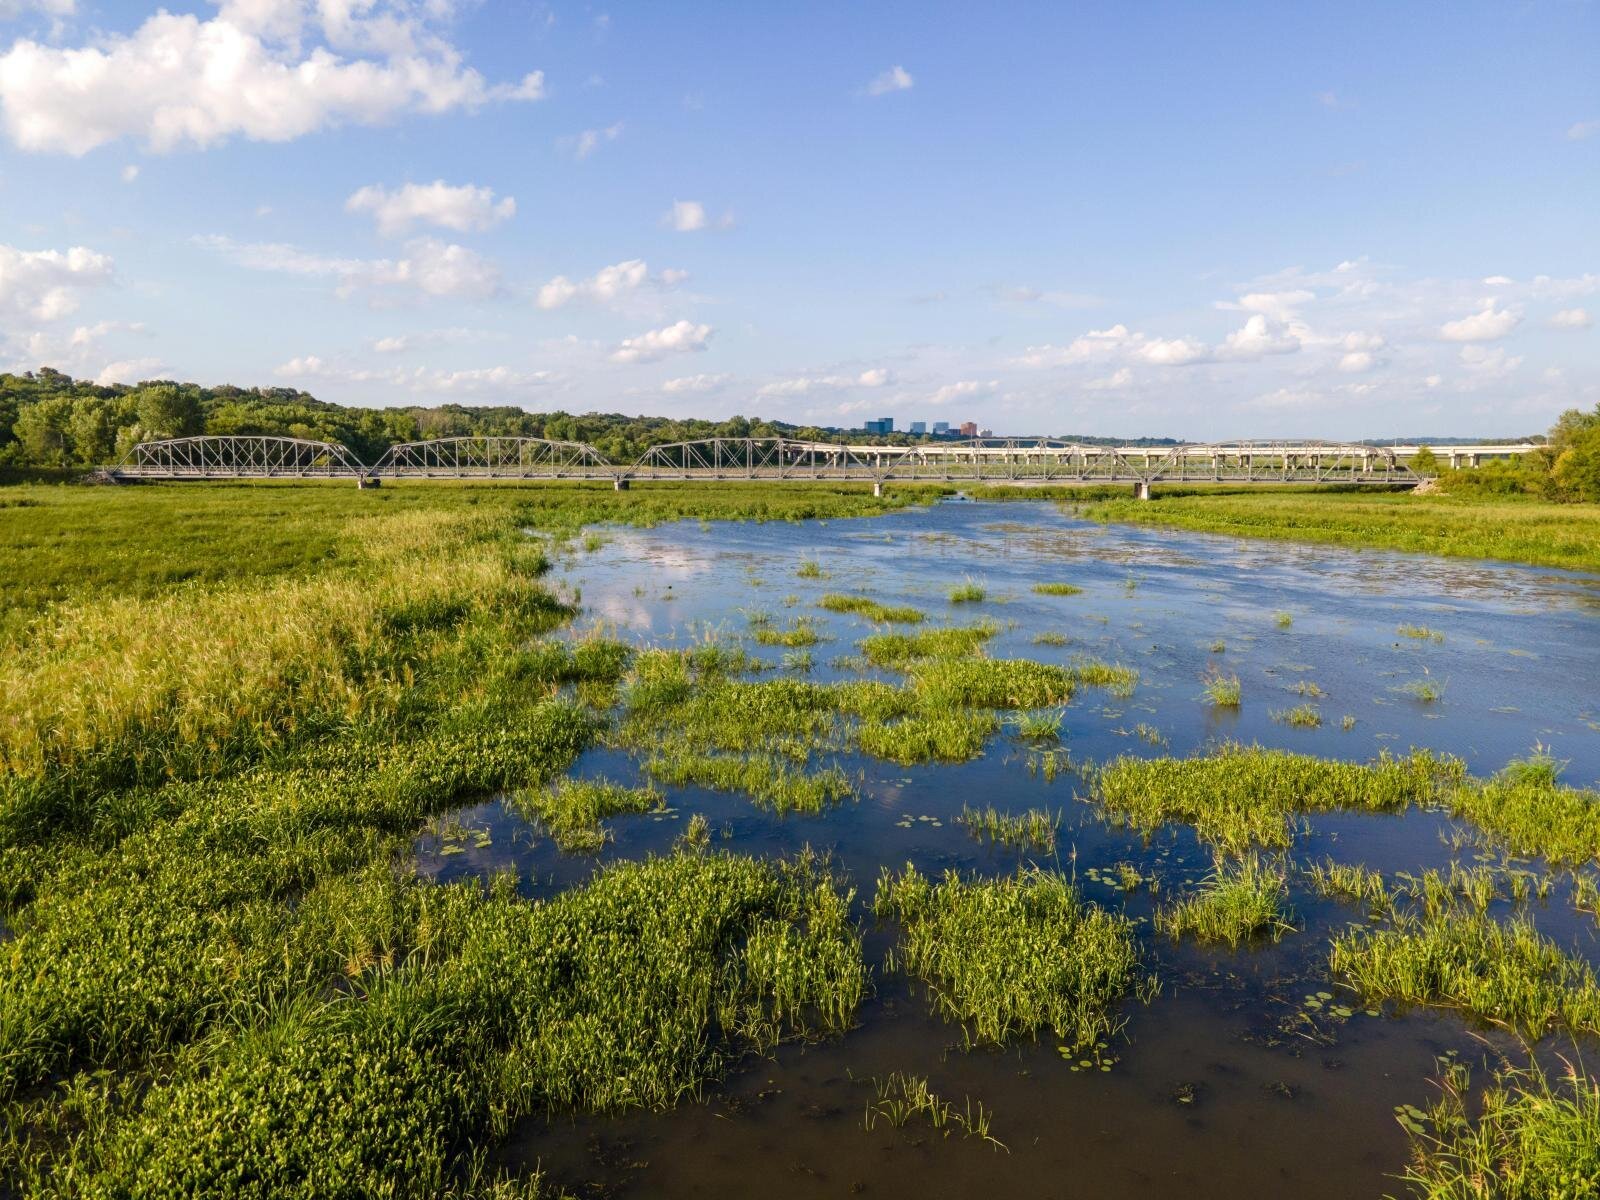 Climate change will disrupt inland wetlands in North America, study finds